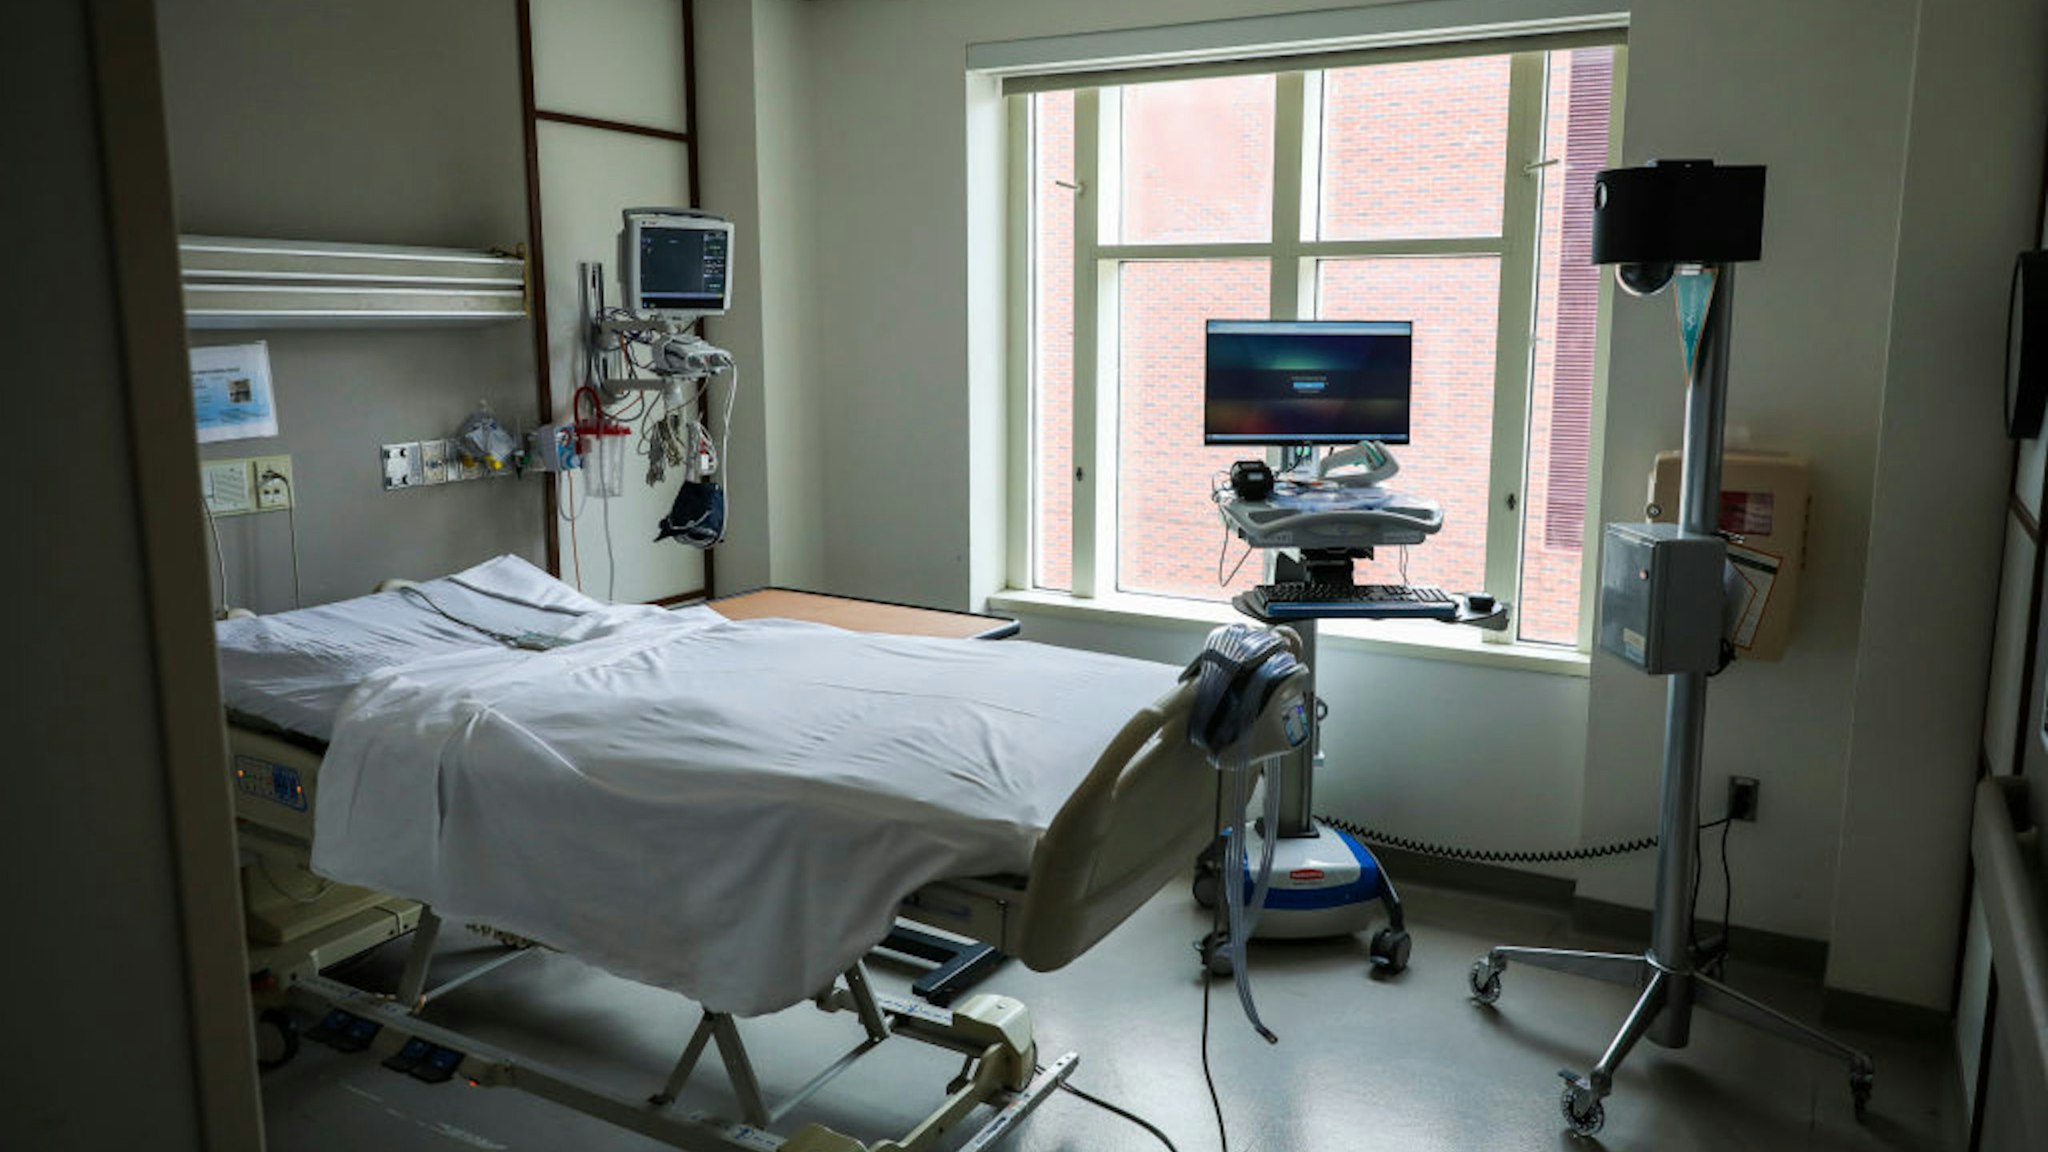 BOSTON, MA - APRIL 15: An empty room is set up and ready for a COVID-19 patient at Boston Medical Center in Boston on April 15, 2020. A camera is placed in the corner of the room to allow nurses and doctors to keep a close eye on the patient in case they roll off the bed or damage their tubes and wires. BMC has been hit hard by the coronavirus, reporting cases at the highest rate so far among major hospitals in the area, according to data tracked by the Globe.